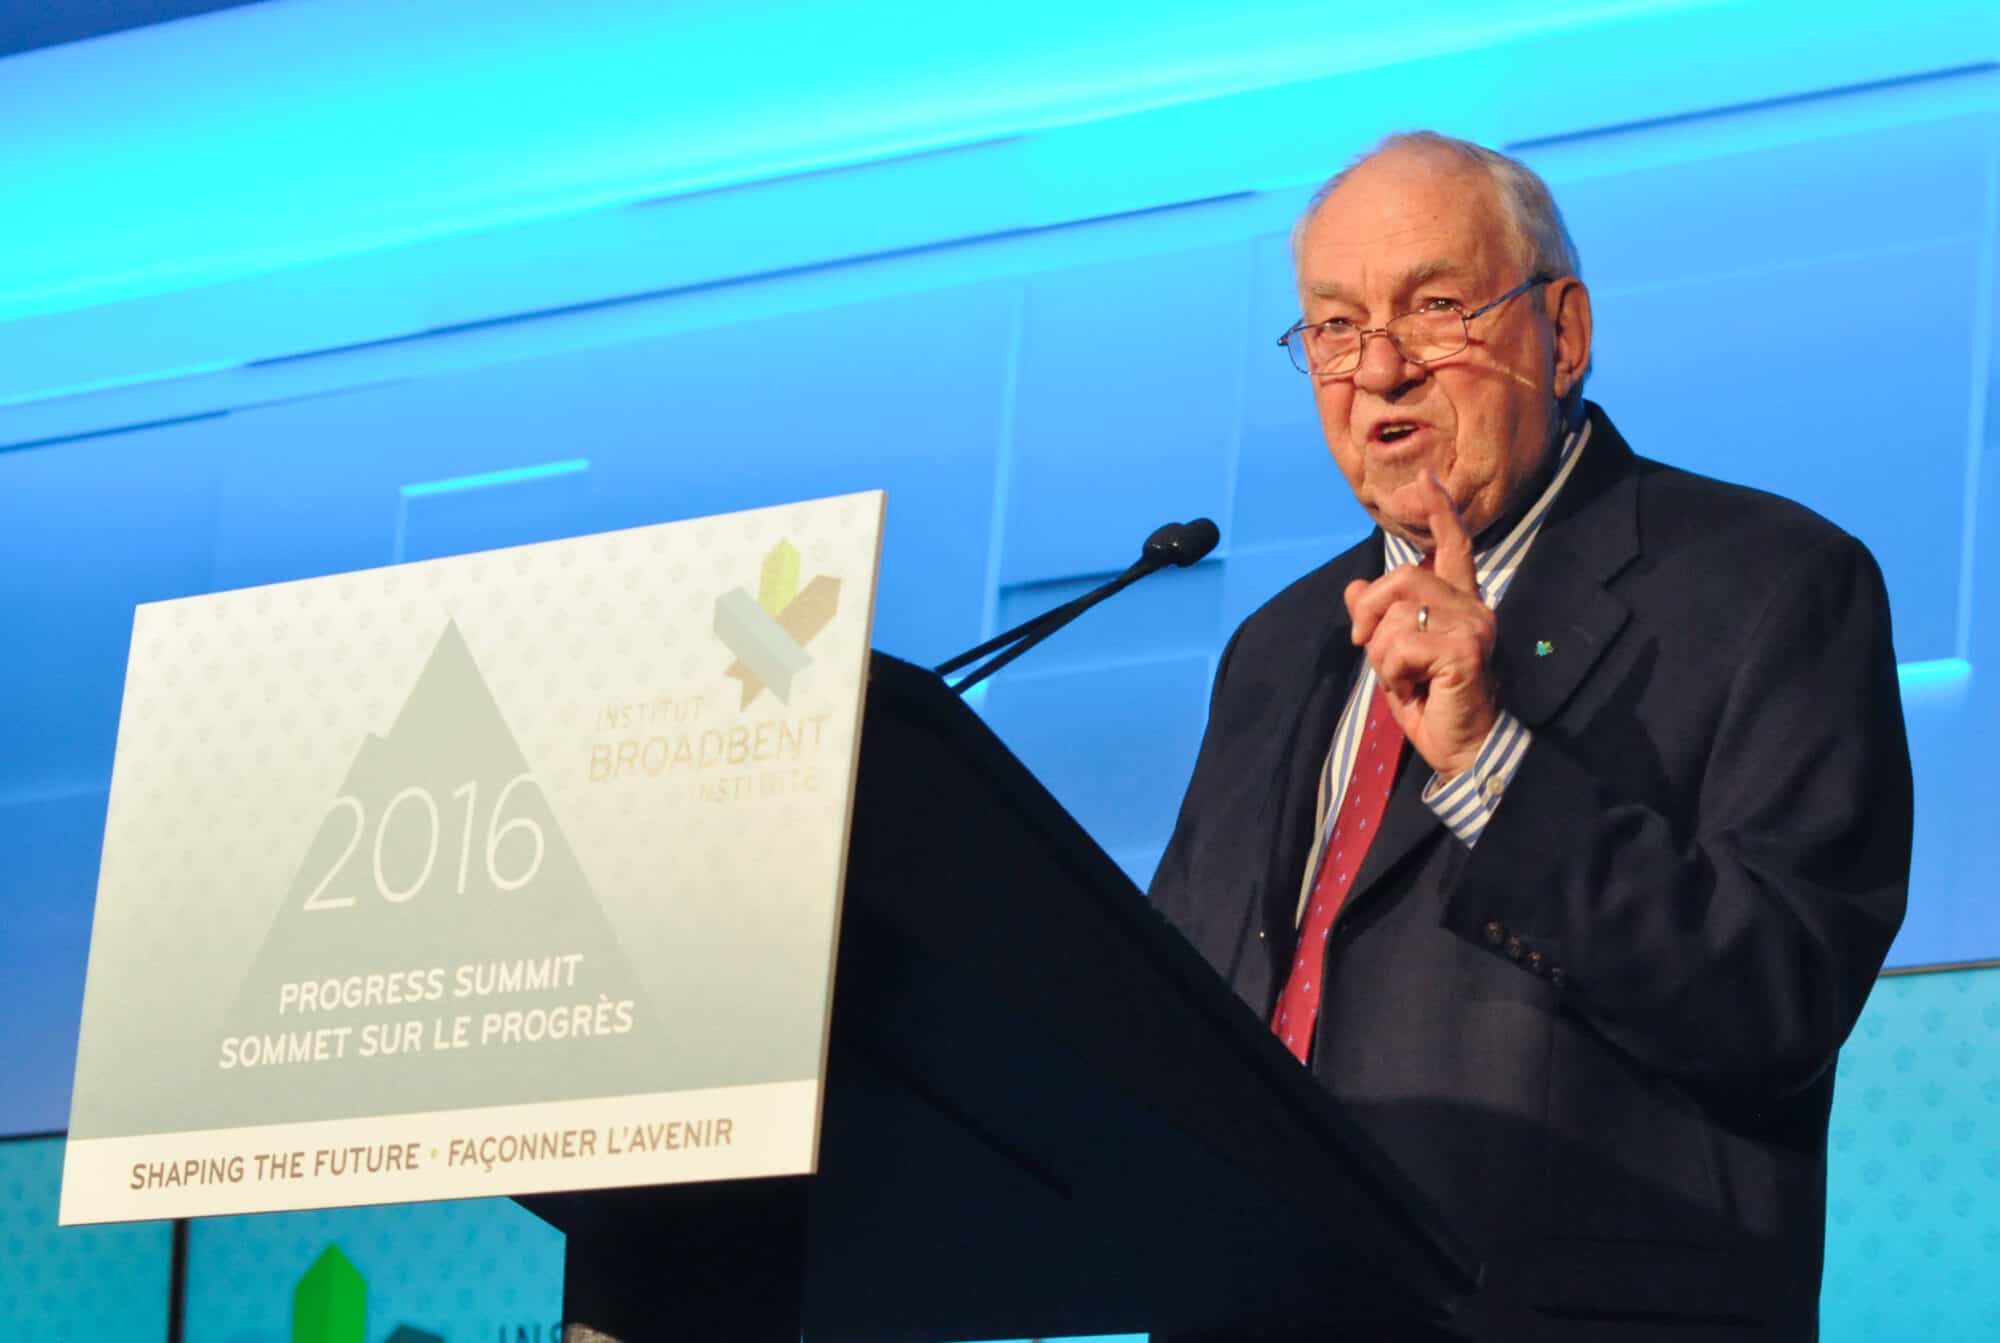 Ed Broadbent speaks from a podium delivering keynote remarks at the Broadbent Institute's 2016 Progress Summit in Ottawa.